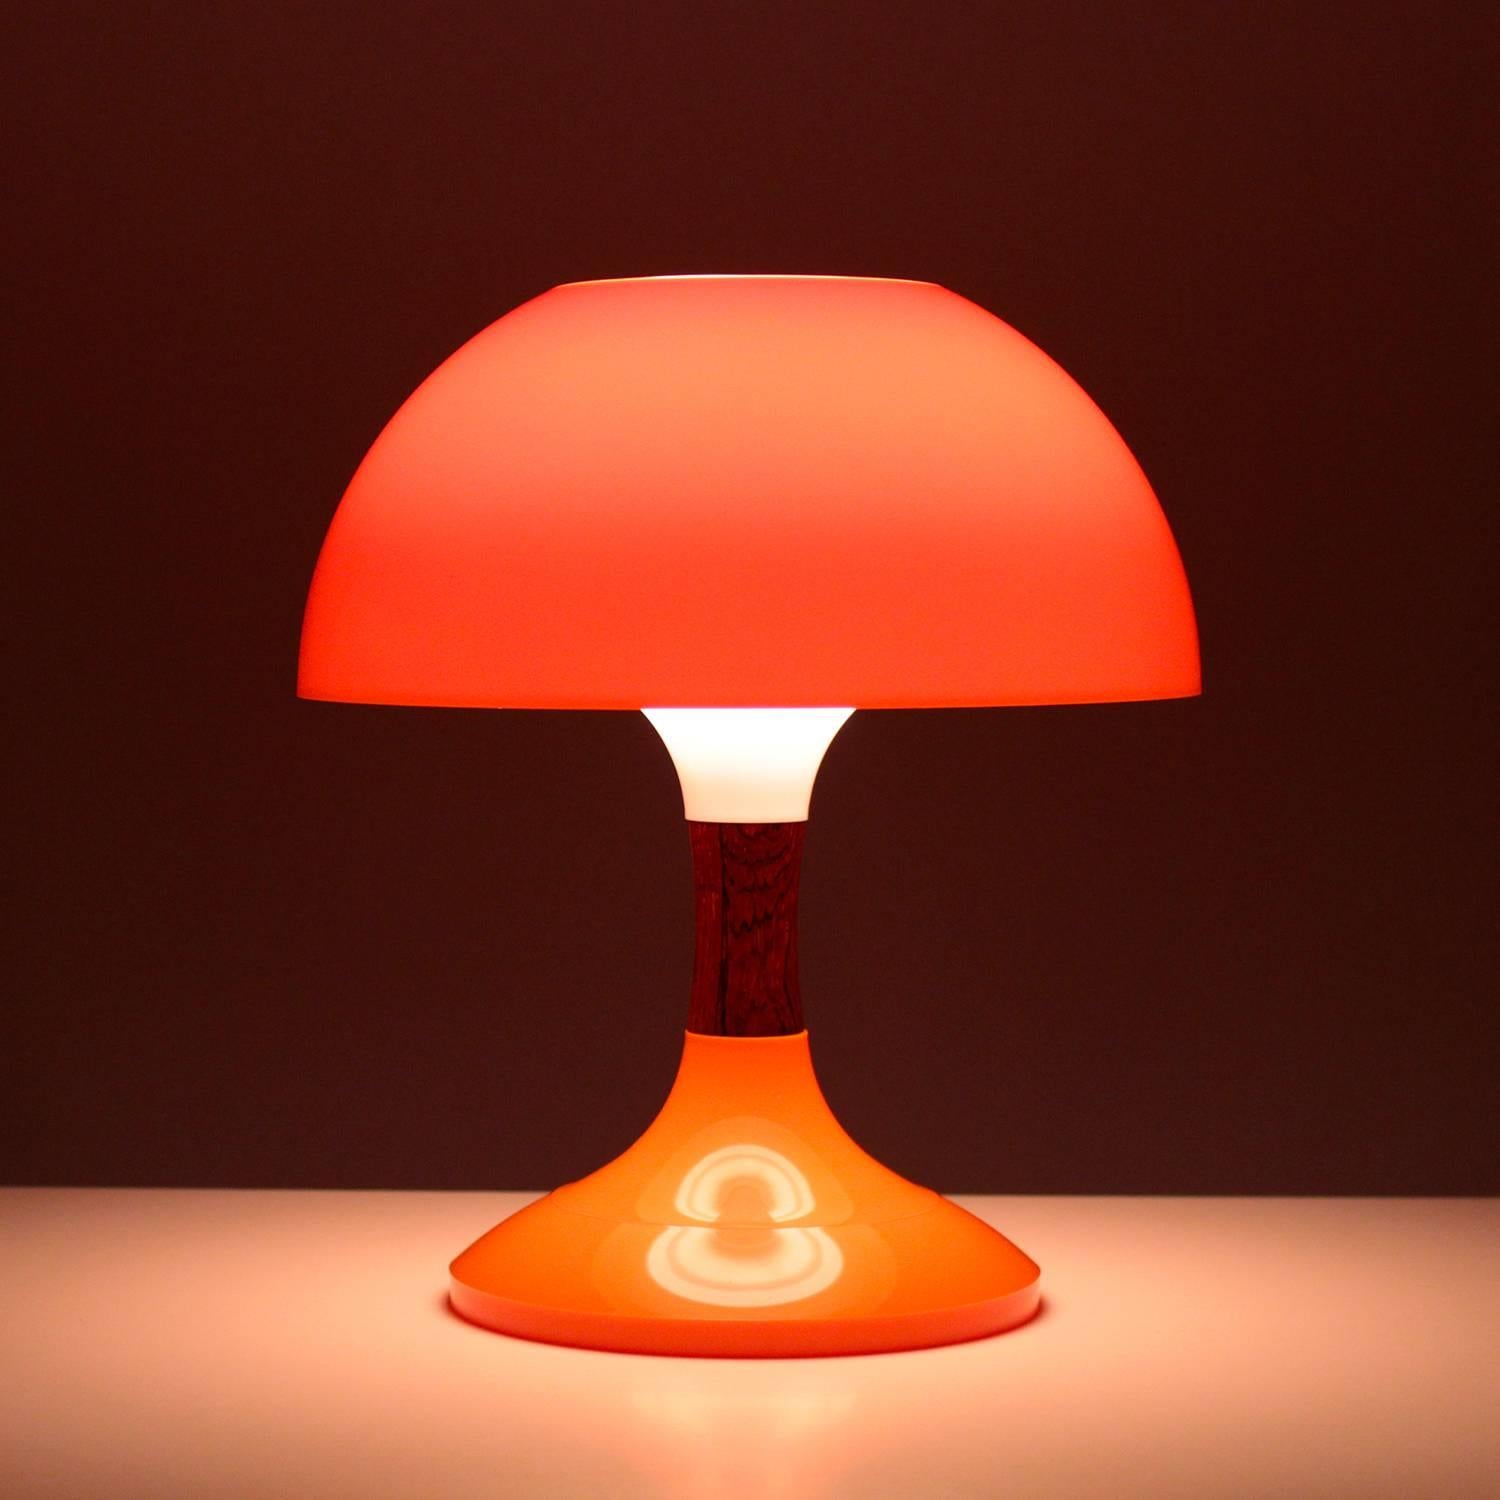 Karina table lamp by Bent Karlby for ASK Belysning in 1971, Super cute and rare table lamp in acrylic and rosewood.

A space-age table lamp with a trumpet shaped base cast in bright orange acrylic, a rosewood middle piece and a bright orange